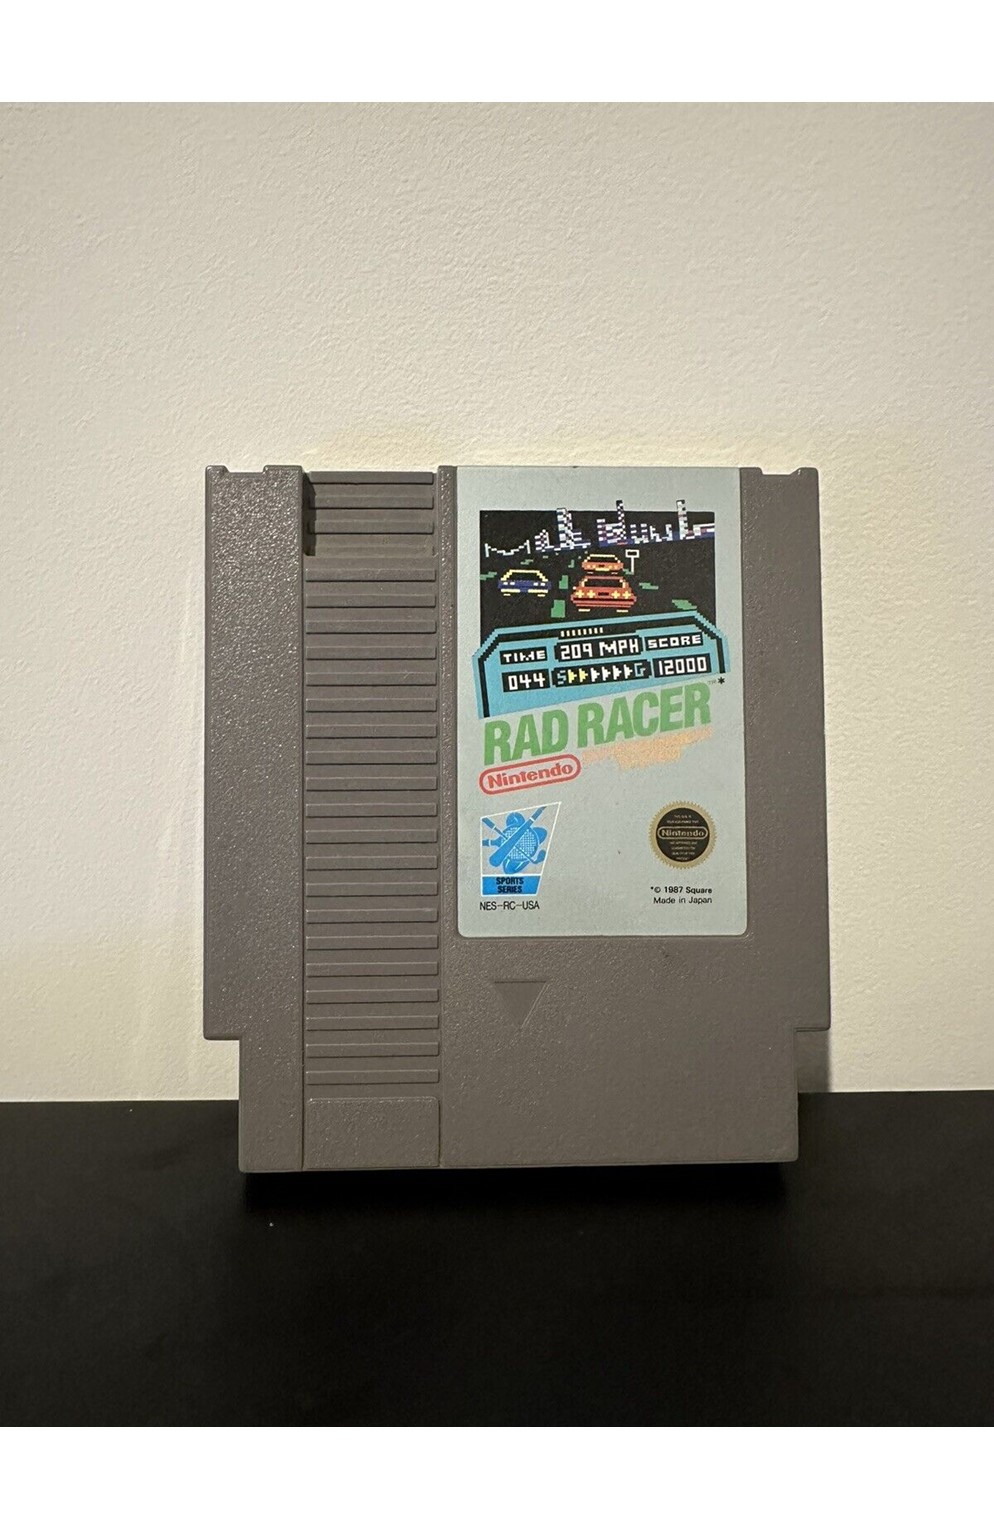 Nintendo Entertainment System Nes Rad Racer - Cartridge Only - Pre-Owned